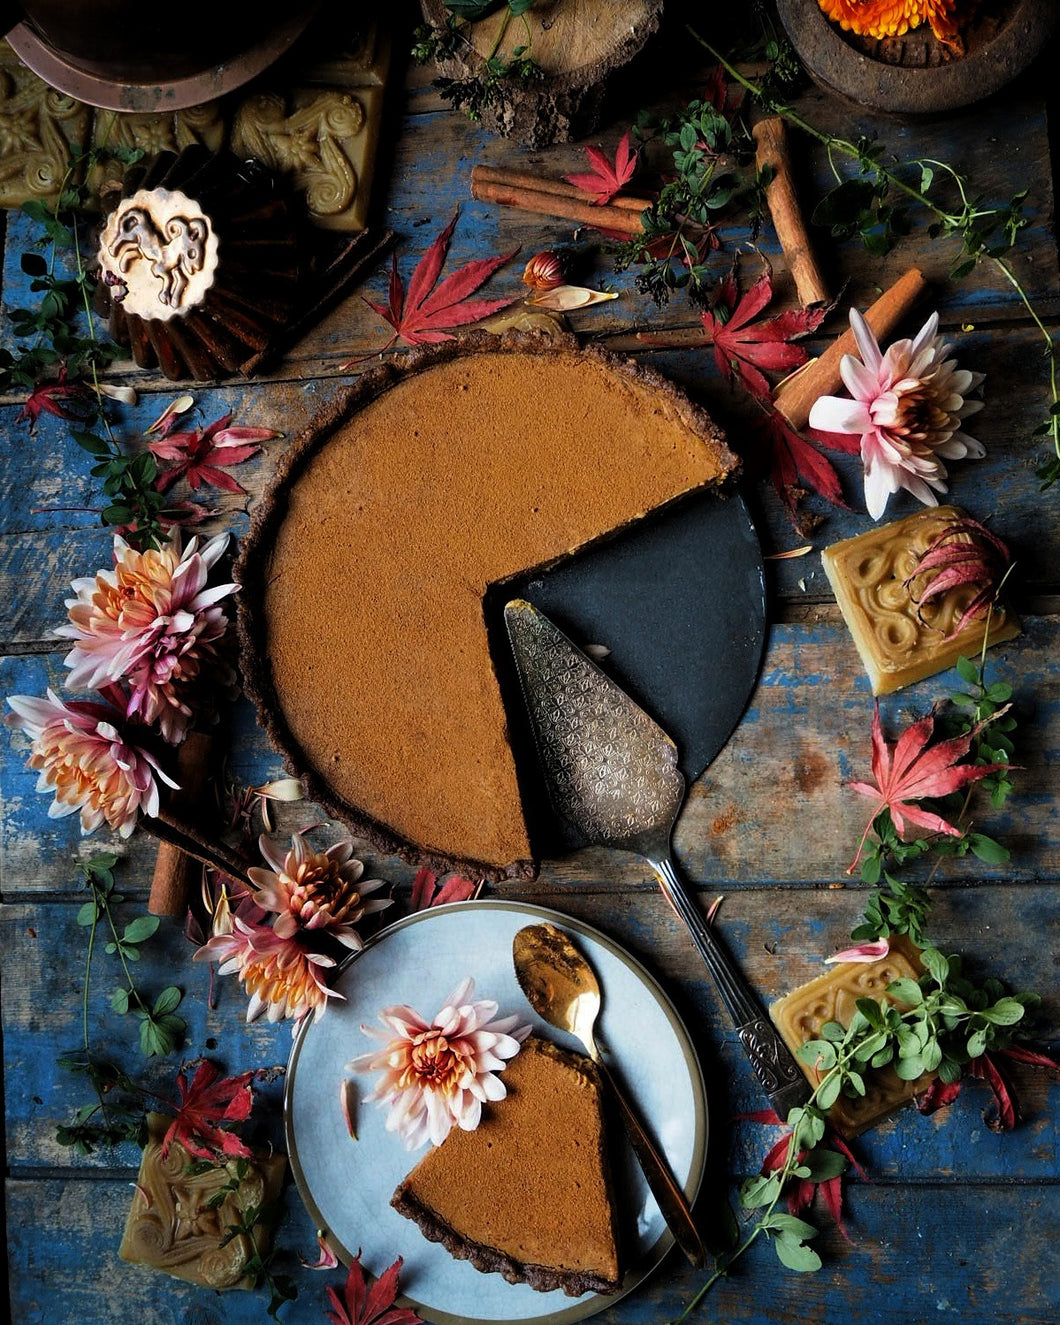 Nine Tea Cups Bakery Raw Vegan, Gluten Free, Dairy Free Pumpkin Pie on a black plate surrounded by flowers, autumn leaves, and beeswax candles, with a slice taken out and placed on a grey plate next to it with a gold coloured spoon and a peach-copper flower